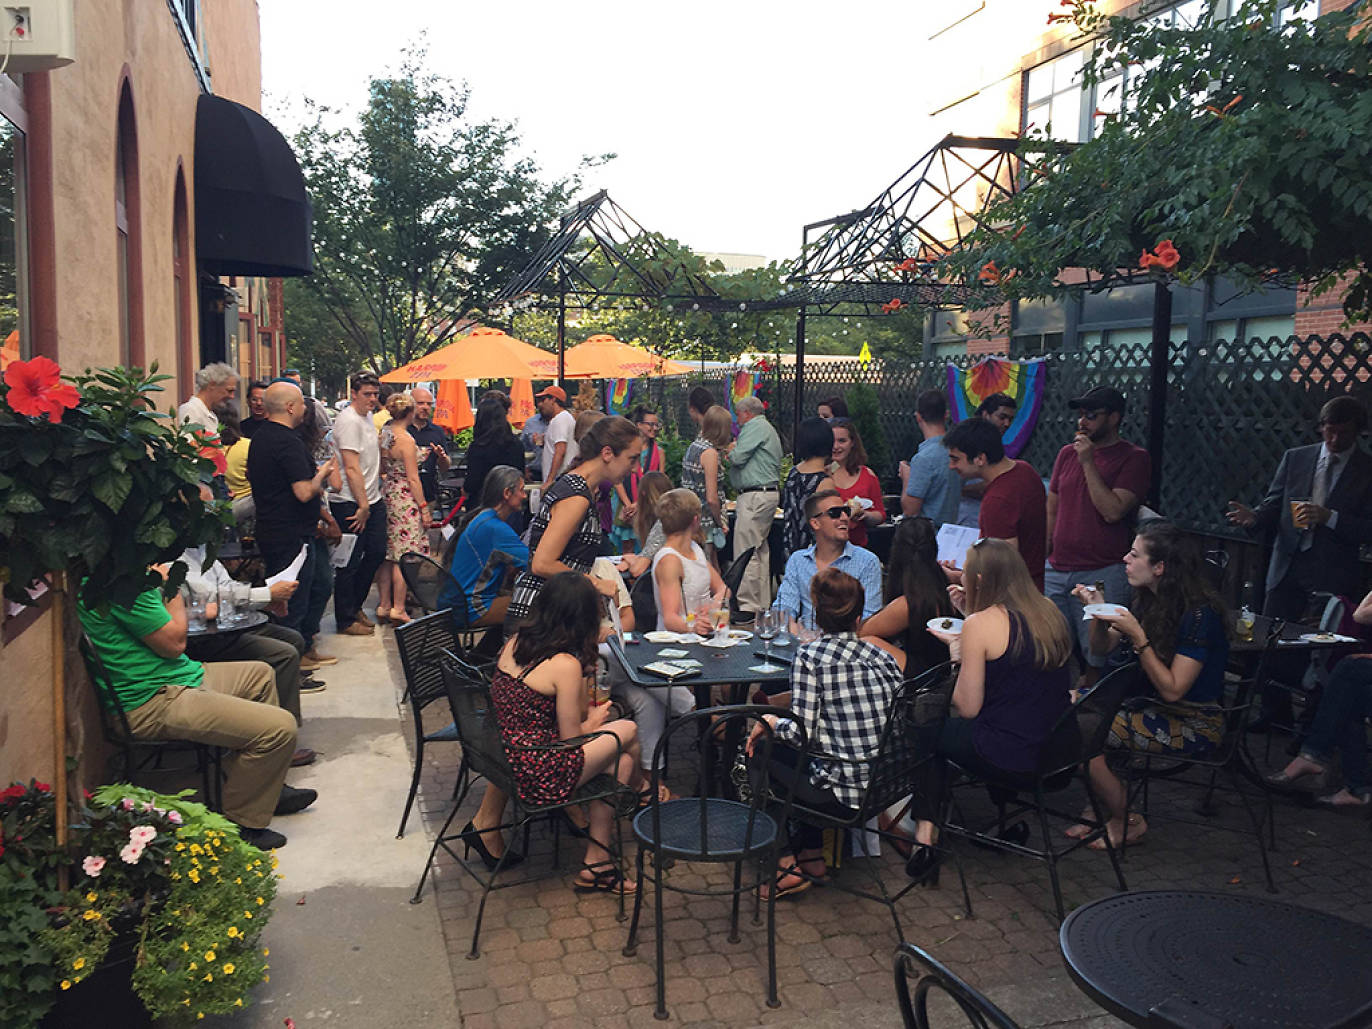 pittsburgh gay bars clubs and organizations